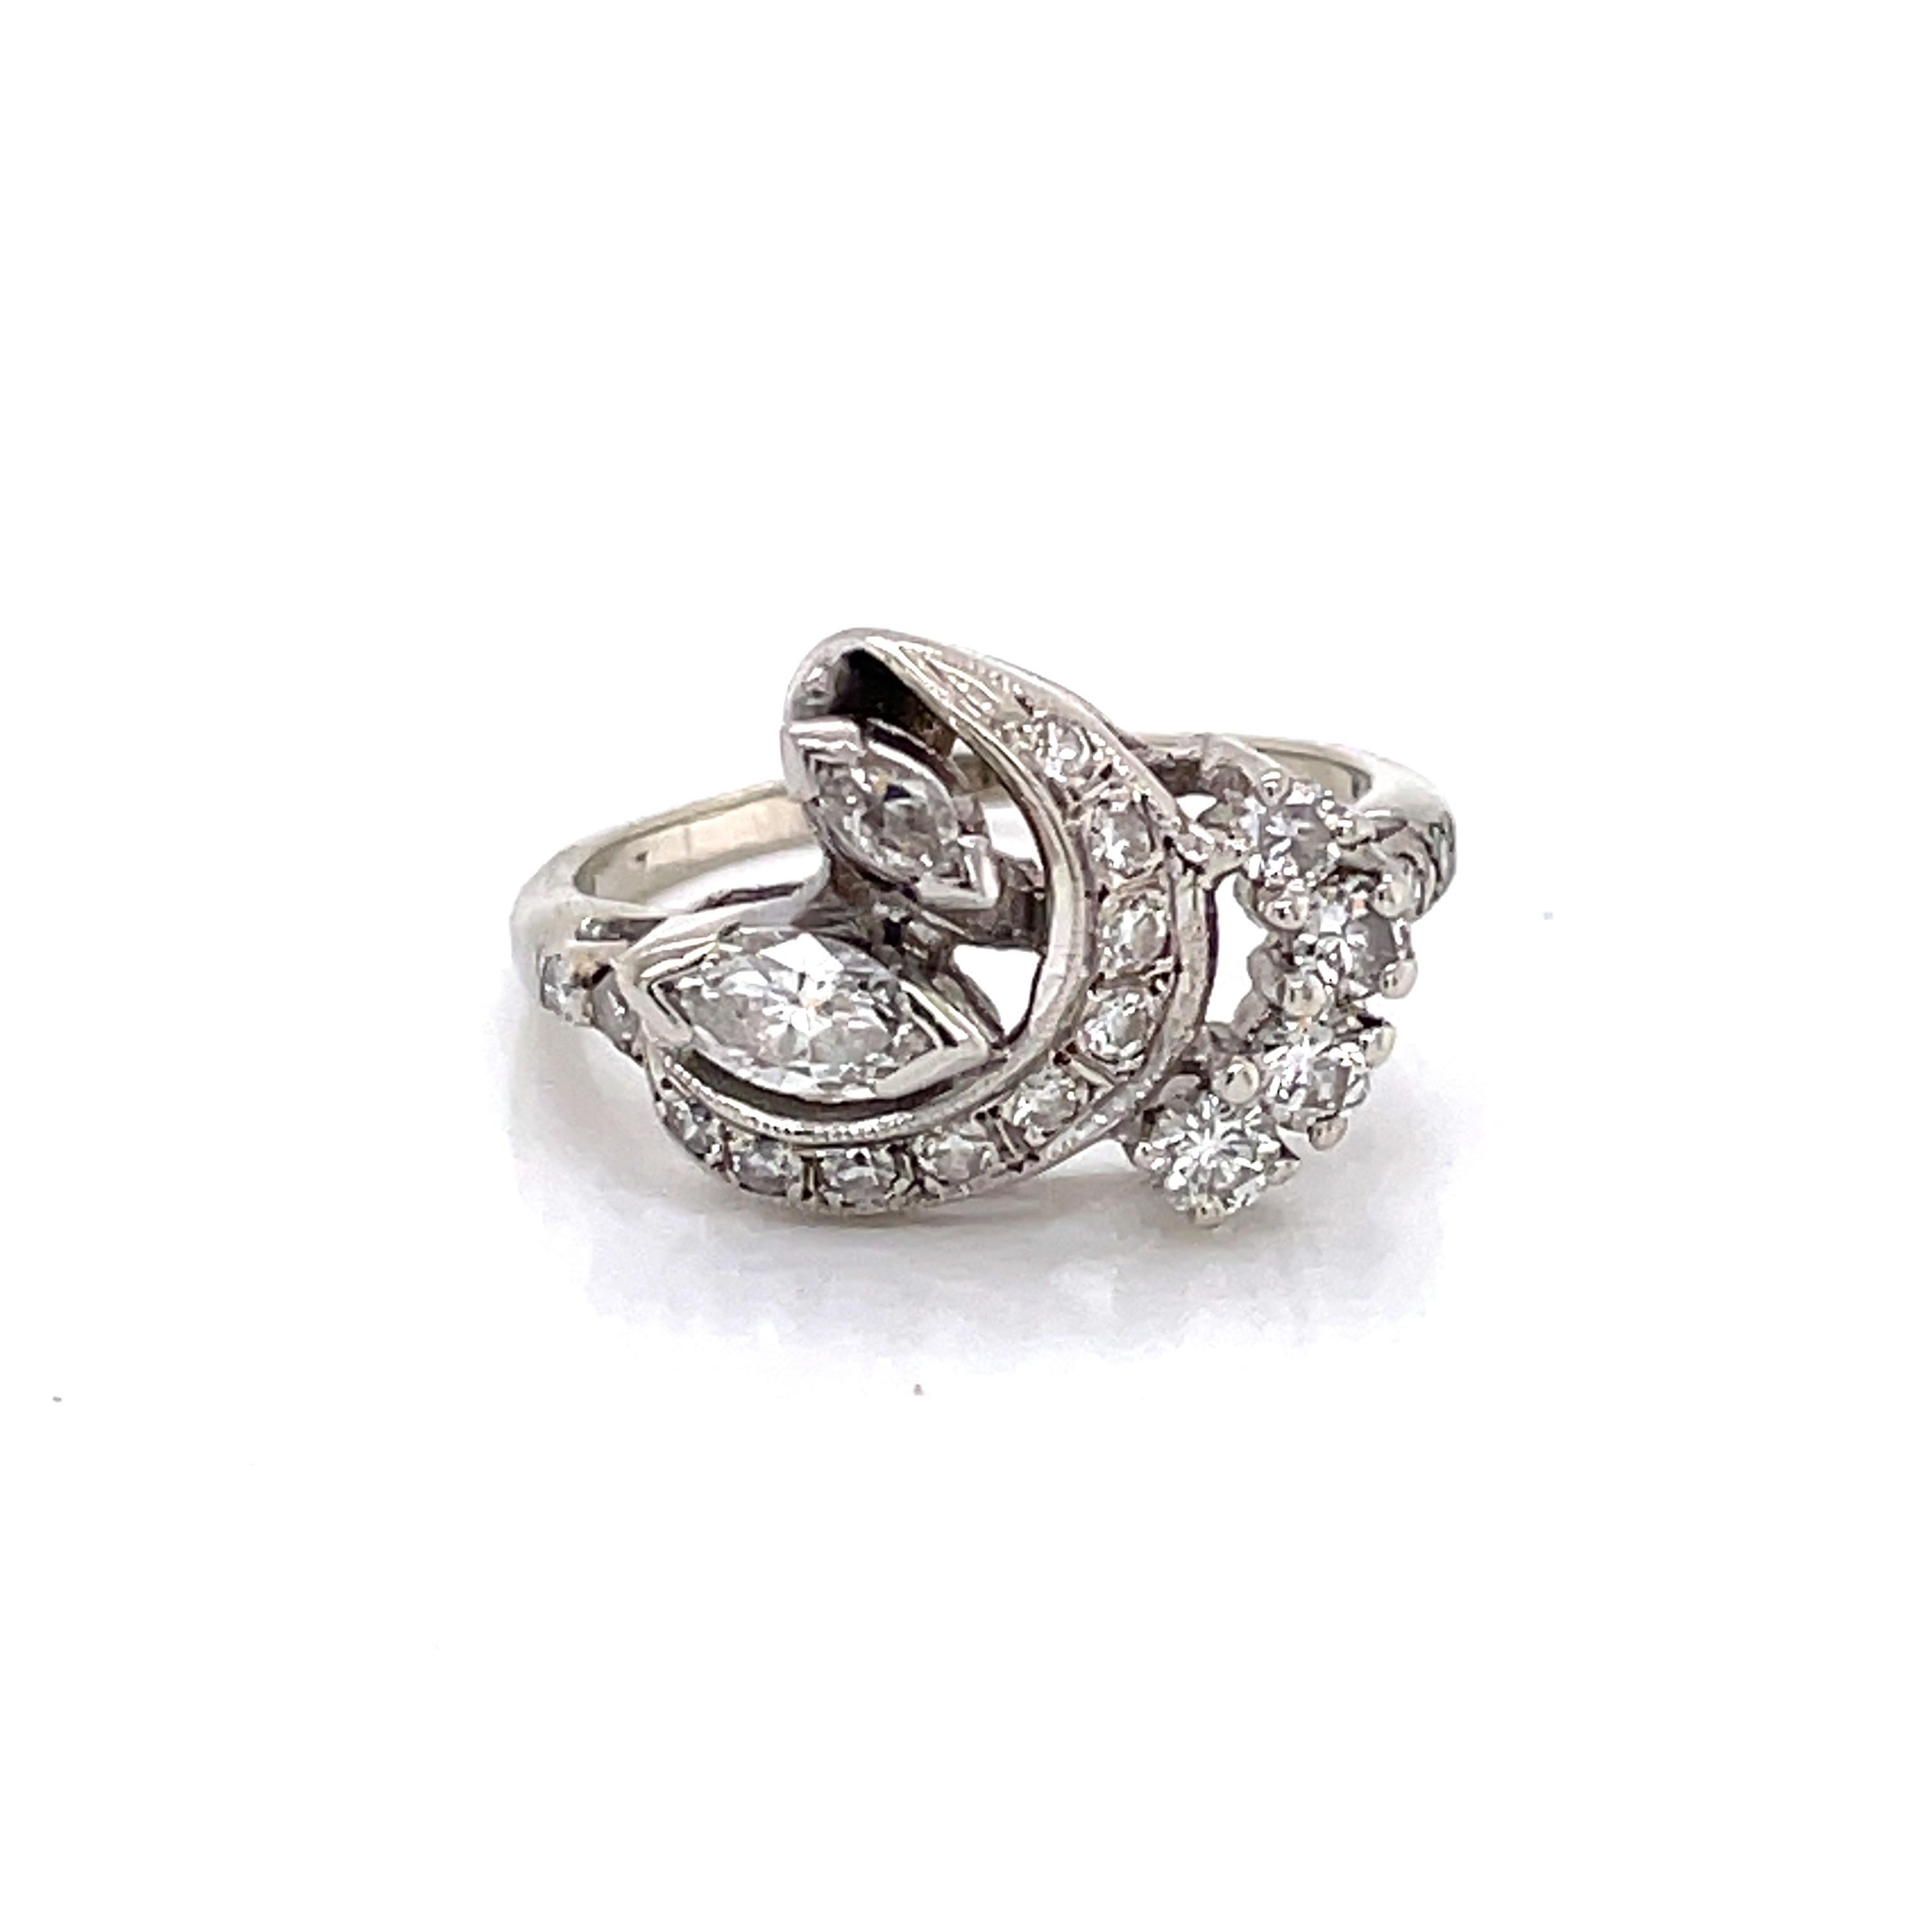 Stylish mixed diamond cuts, both marquis and round,  accent the asymmetrical design of this fourteen karat white gold 14K antique cocktail ring. With an estimated .34 total carat weight of H/VS diamonds, the curves of this ring sparkle with